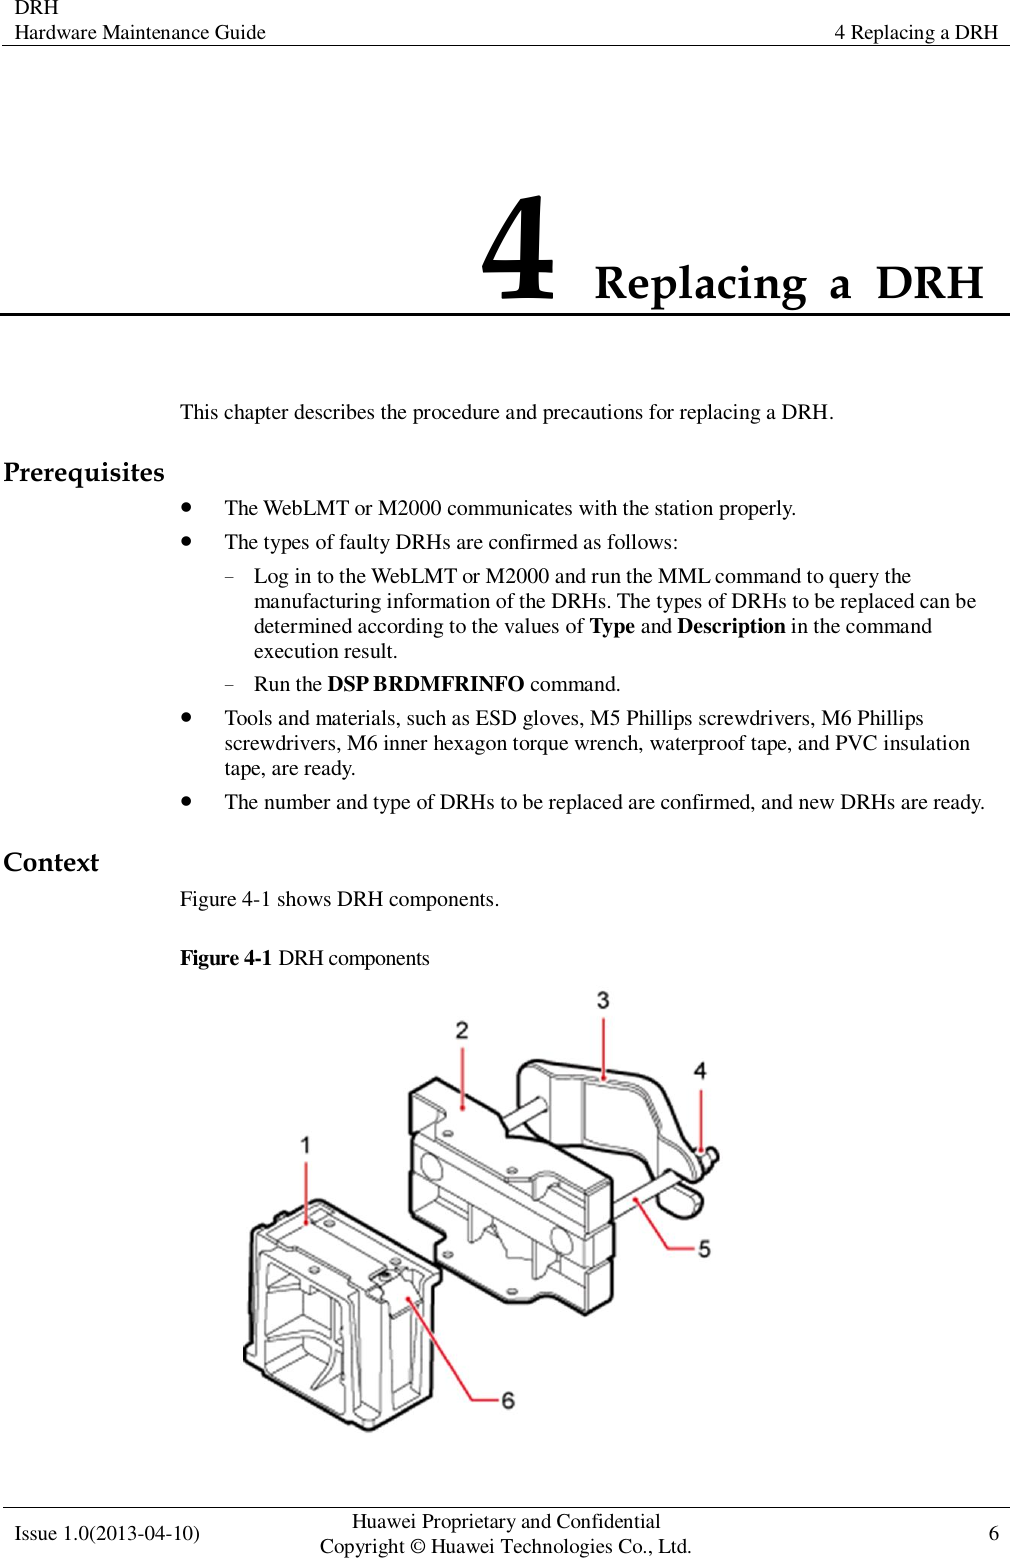 DRH Hardware Maintenance Guide 4 Replacing a DRH  Issue 1.0(2013-04-10) Huawei Proprietary and Confidential                                     Copyright © Huawei Technologies Co., Ltd. 6    4 Replacing  a  DRH   This chapter describes the procedure and precautions for replacing a DRH. Prerequisites  The WebLMT or M2000 communicates with the station properly.  The types of faulty DRHs are confirmed as follows: − Log in to the WebLMT or M2000 and run the MML command to query the manufacturing information of the DRHs. The types of DRHs to be replaced can be determined according to the values of Type and Description in the command execution result. − Run the DSP BRDMFRINFO command.    Tools and materials, such as ESD gloves, M5 Phillips screwdrivers, M6 Phillips screwdrivers, M6 inner hexagon torque wrench, waterproof tape, and PVC insulation tape, are ready.  The number and type of DRHs to be replaced are confirmed, and new DRHs are ready. Context Figure 4-1 shows DRH components. Figure 4-1 DRH components  